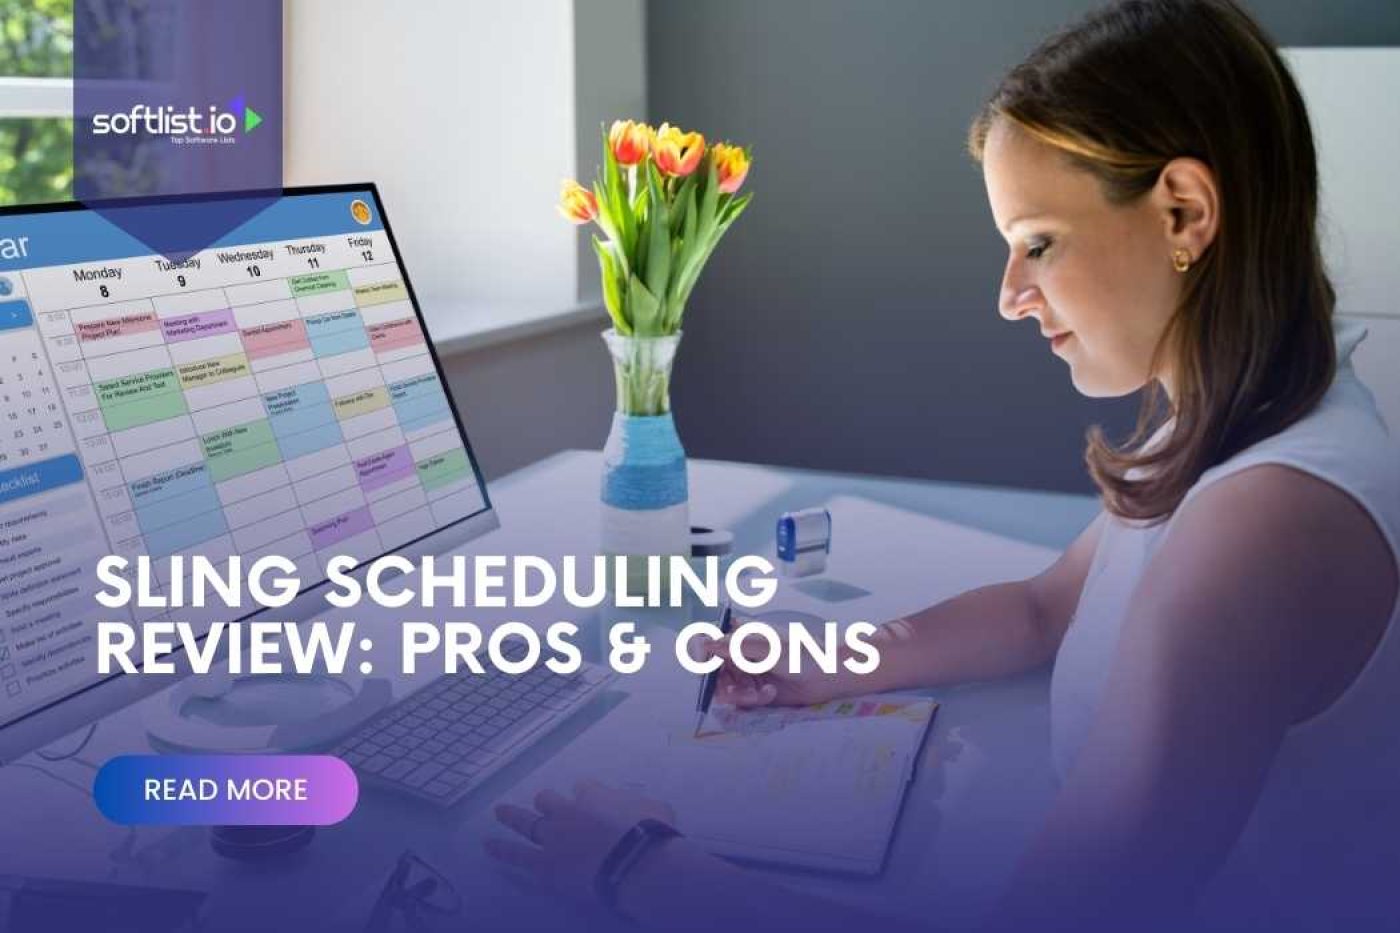 Sling Scheduling Review Pros & Cons